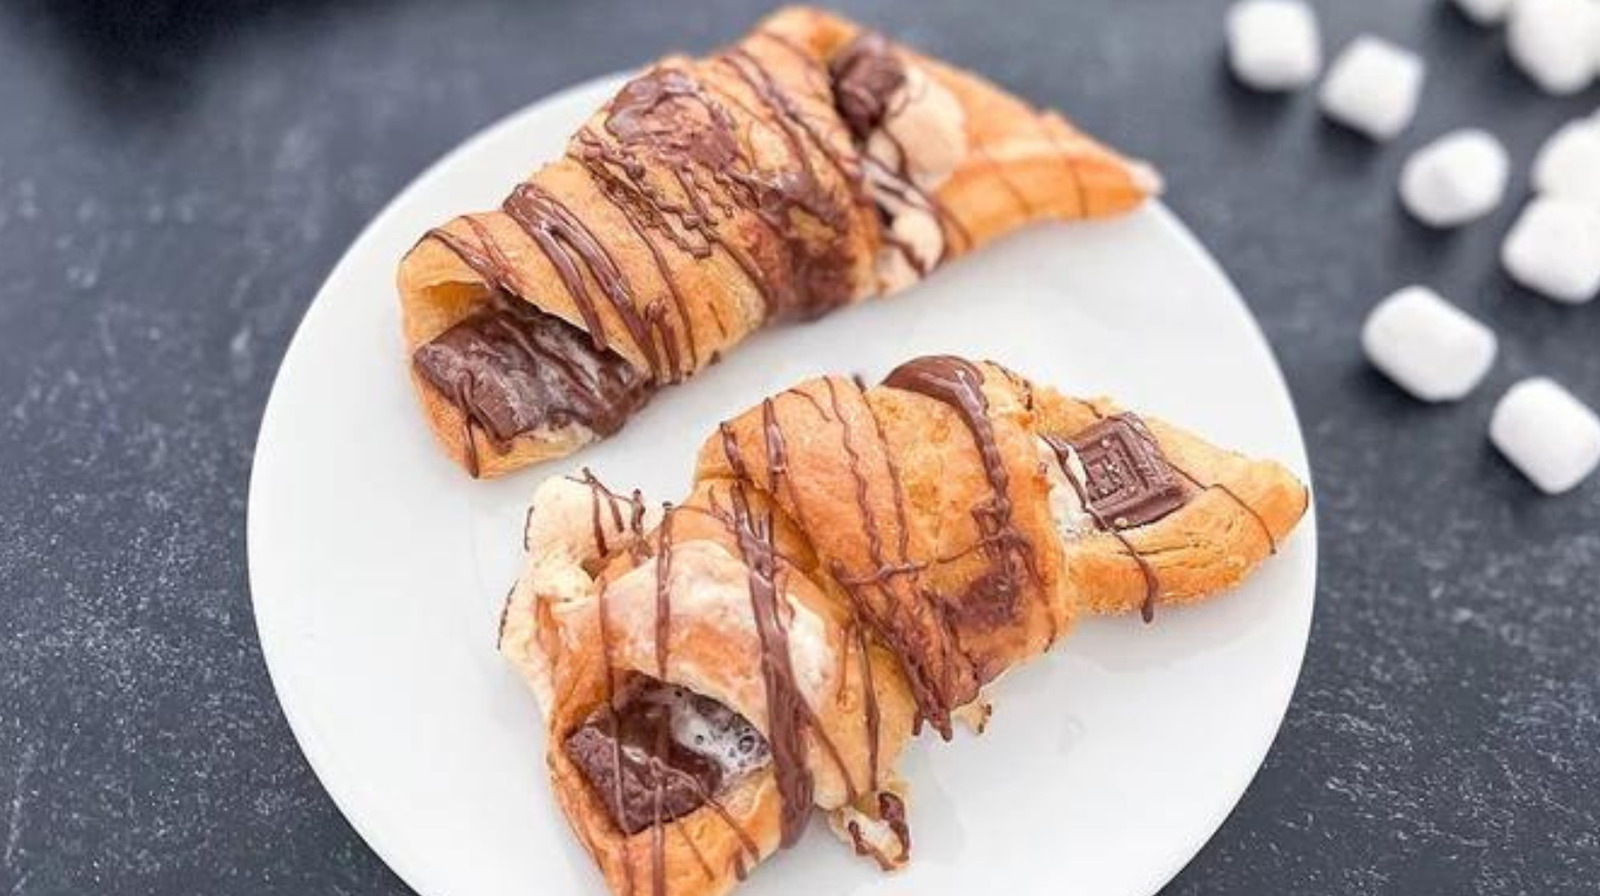 https://www.mashed.com/img/gallery/10-delicious-things-you-can-make-with-crescent-rolls/l-intro-1690991011.jpg